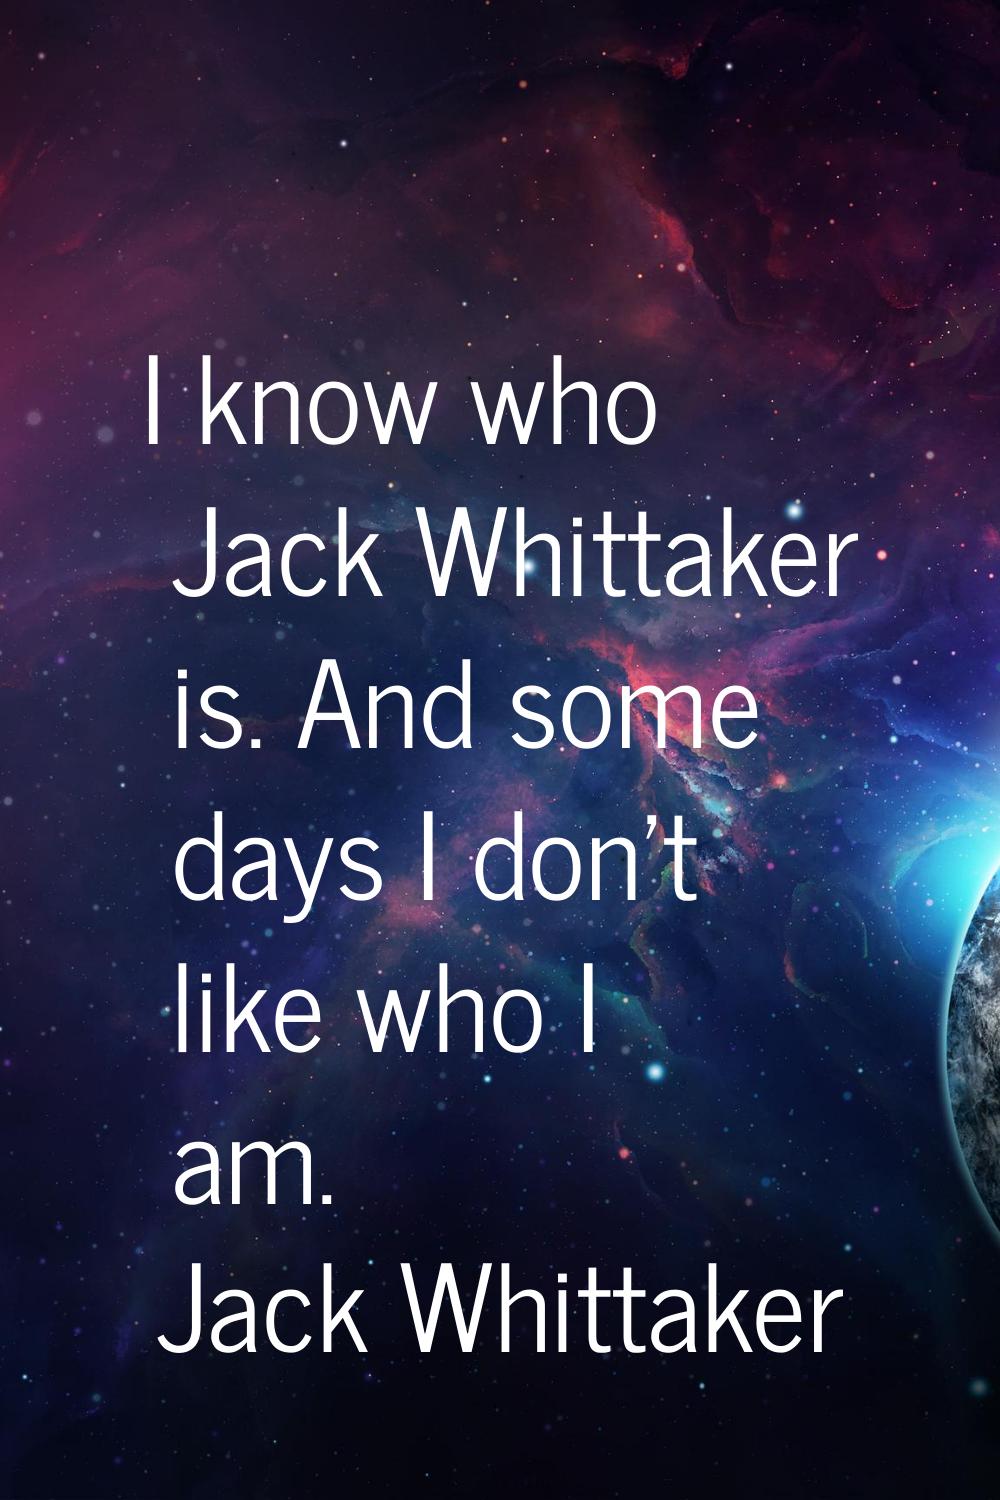 I know who Jack Whittaker is. And some days I don't like who I am.